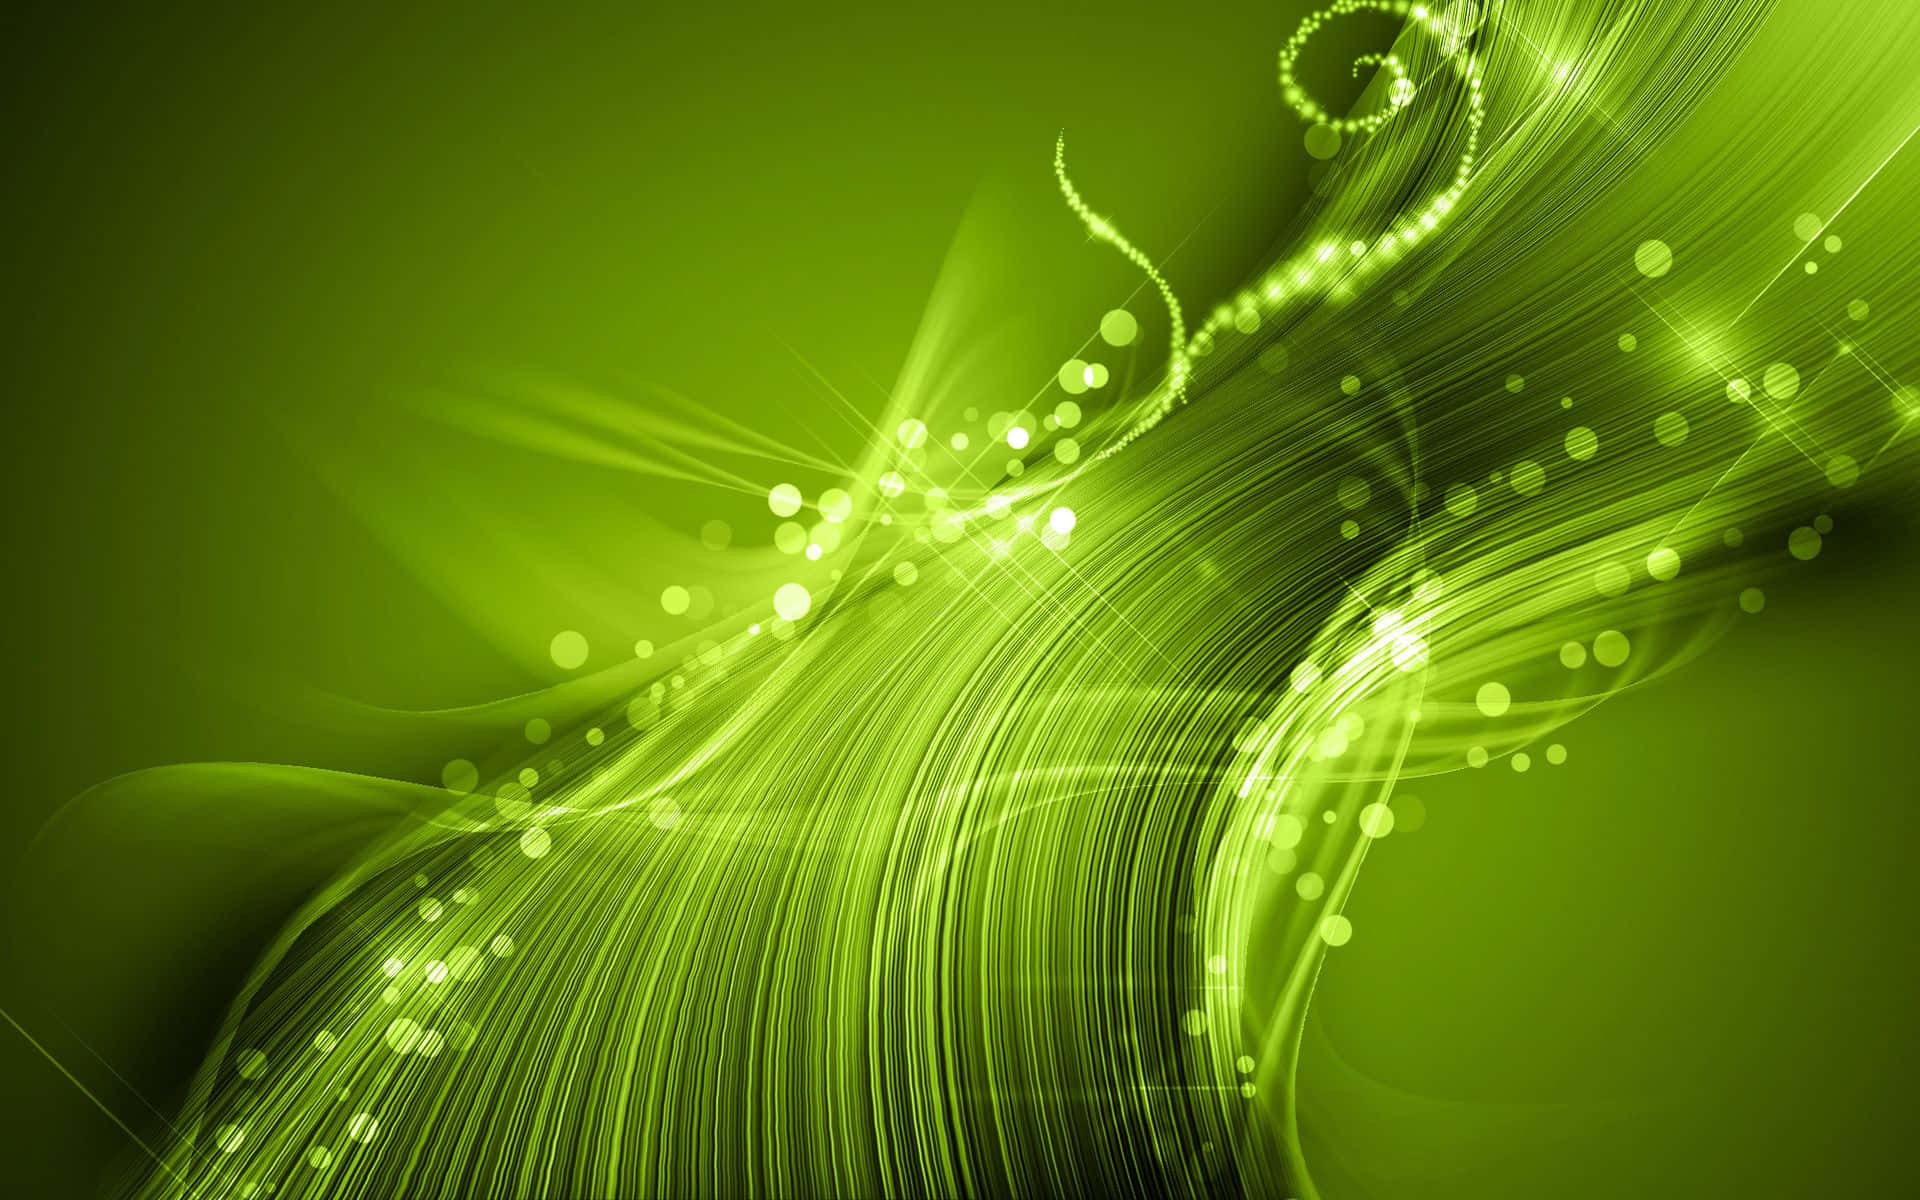 Green Abstract Background With Swirls And Lights Wallpaper